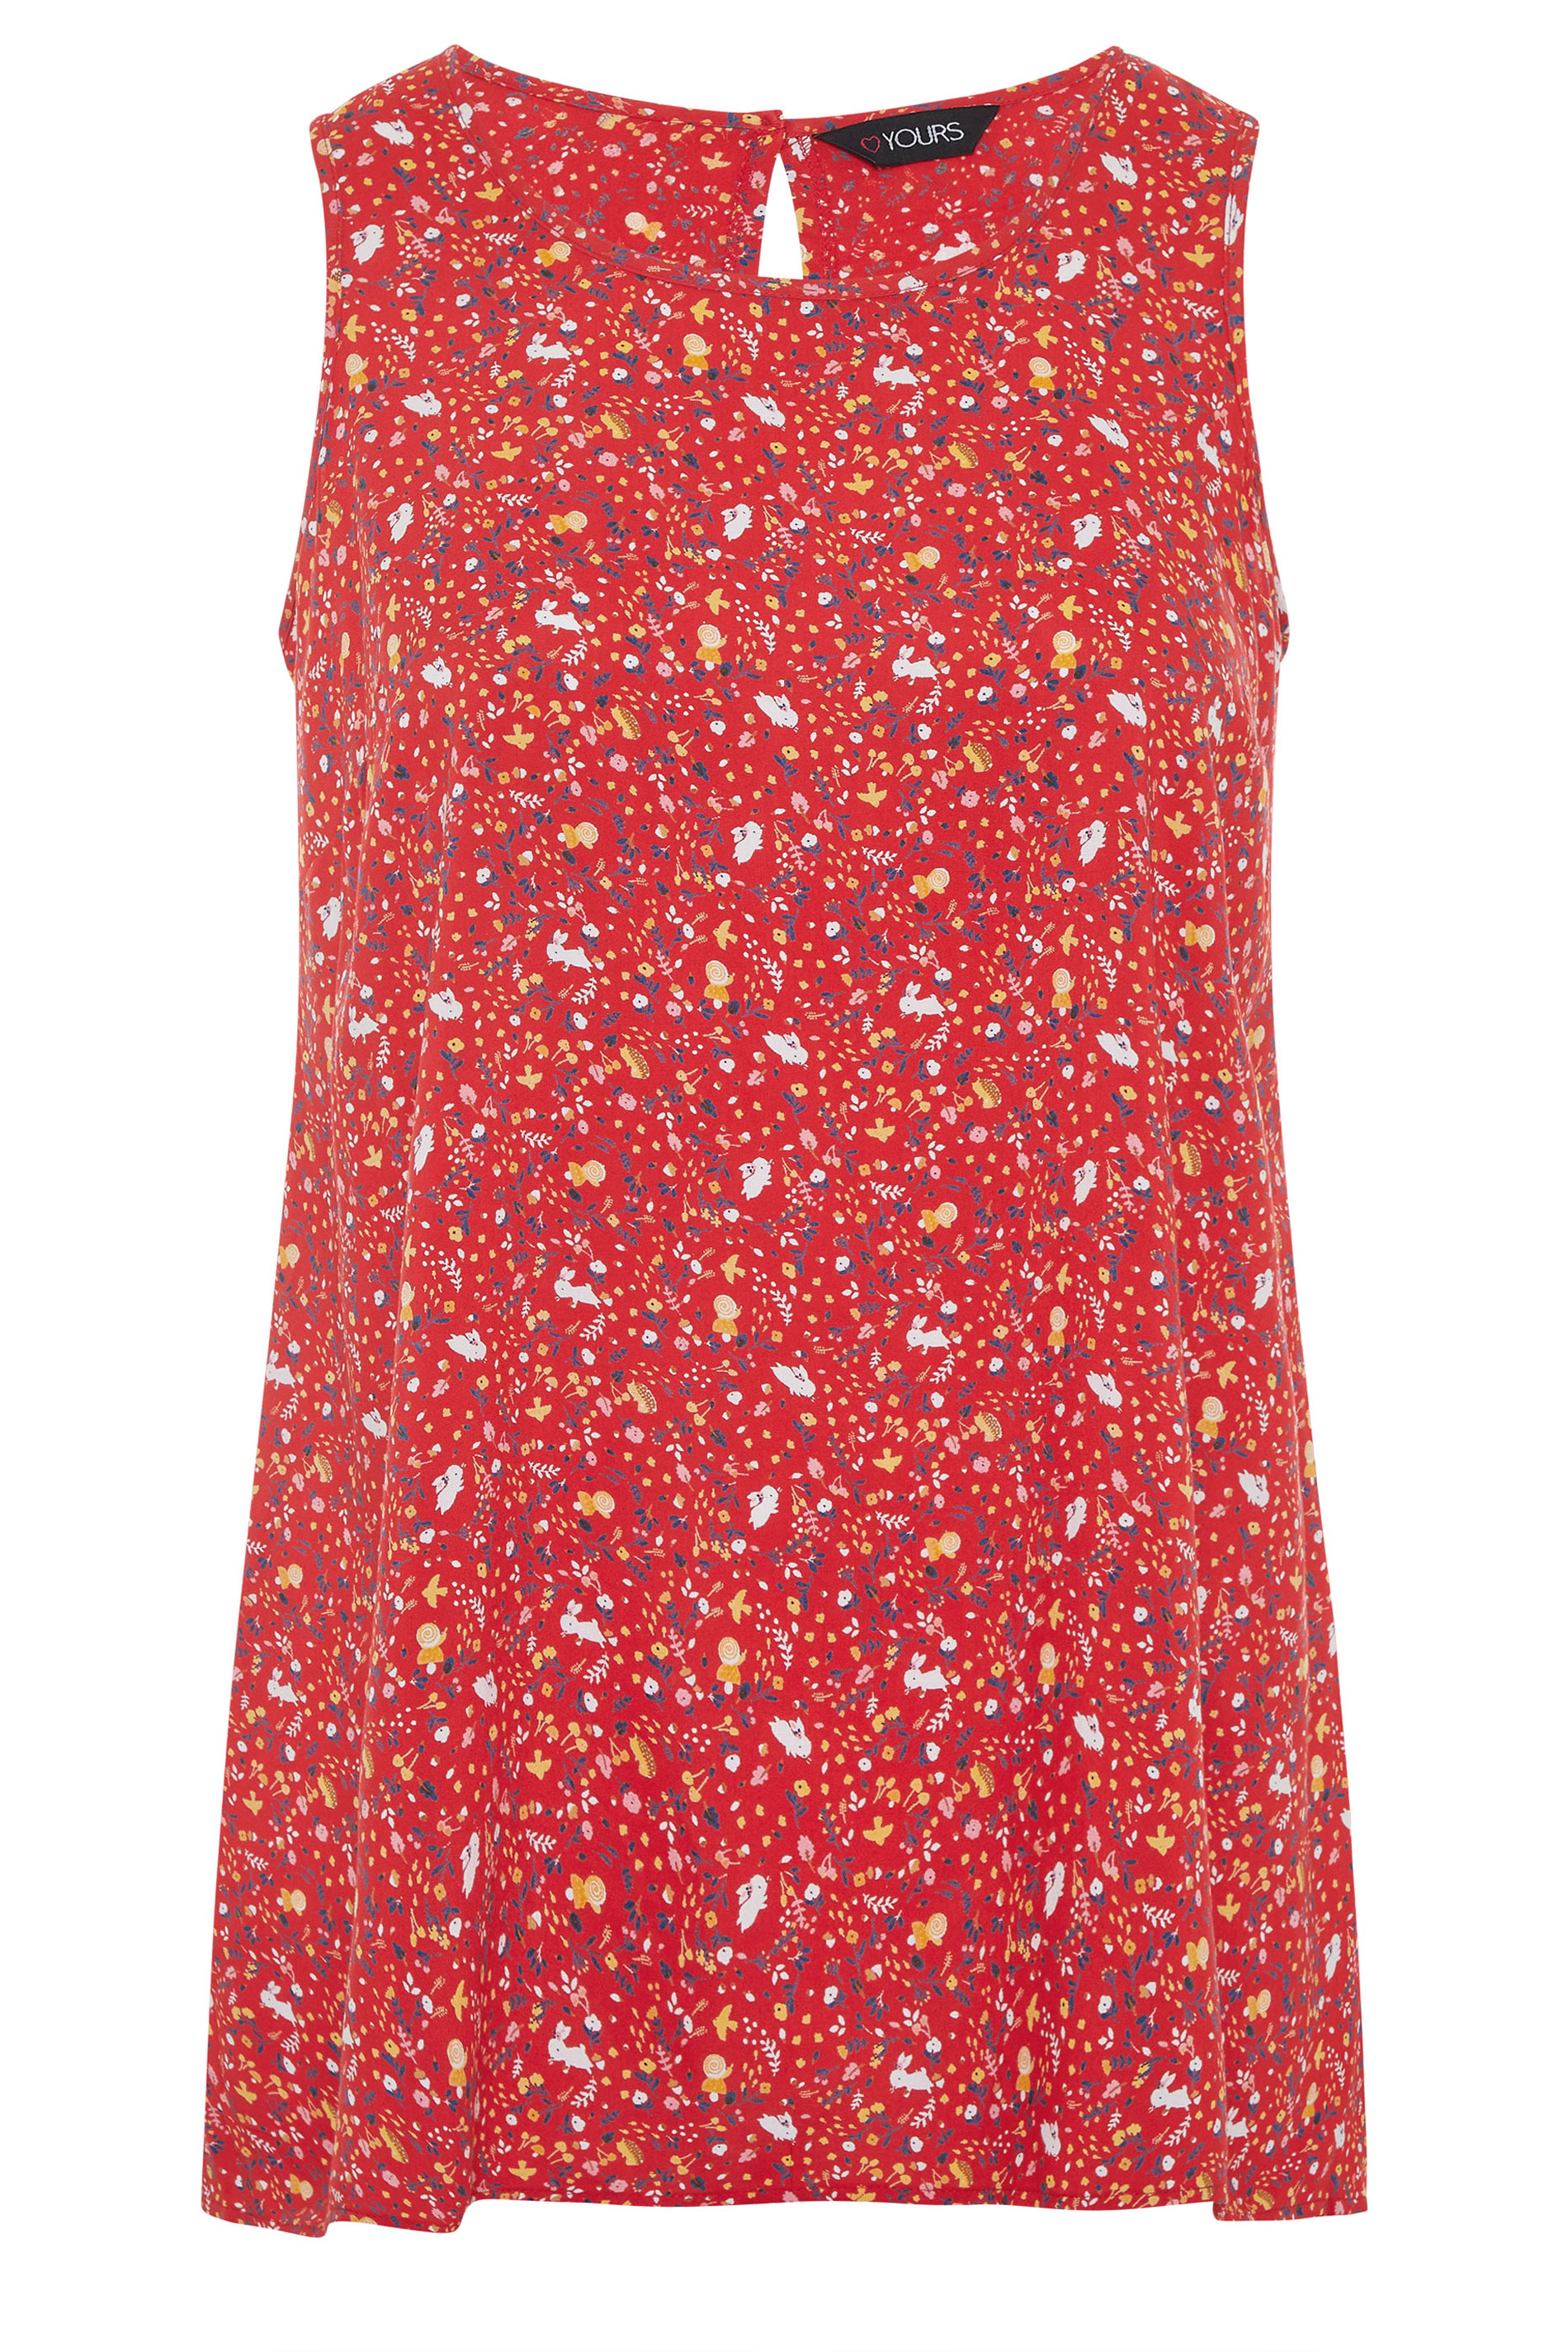 Red Floral Print Sleeveless Top | Yours Clothing